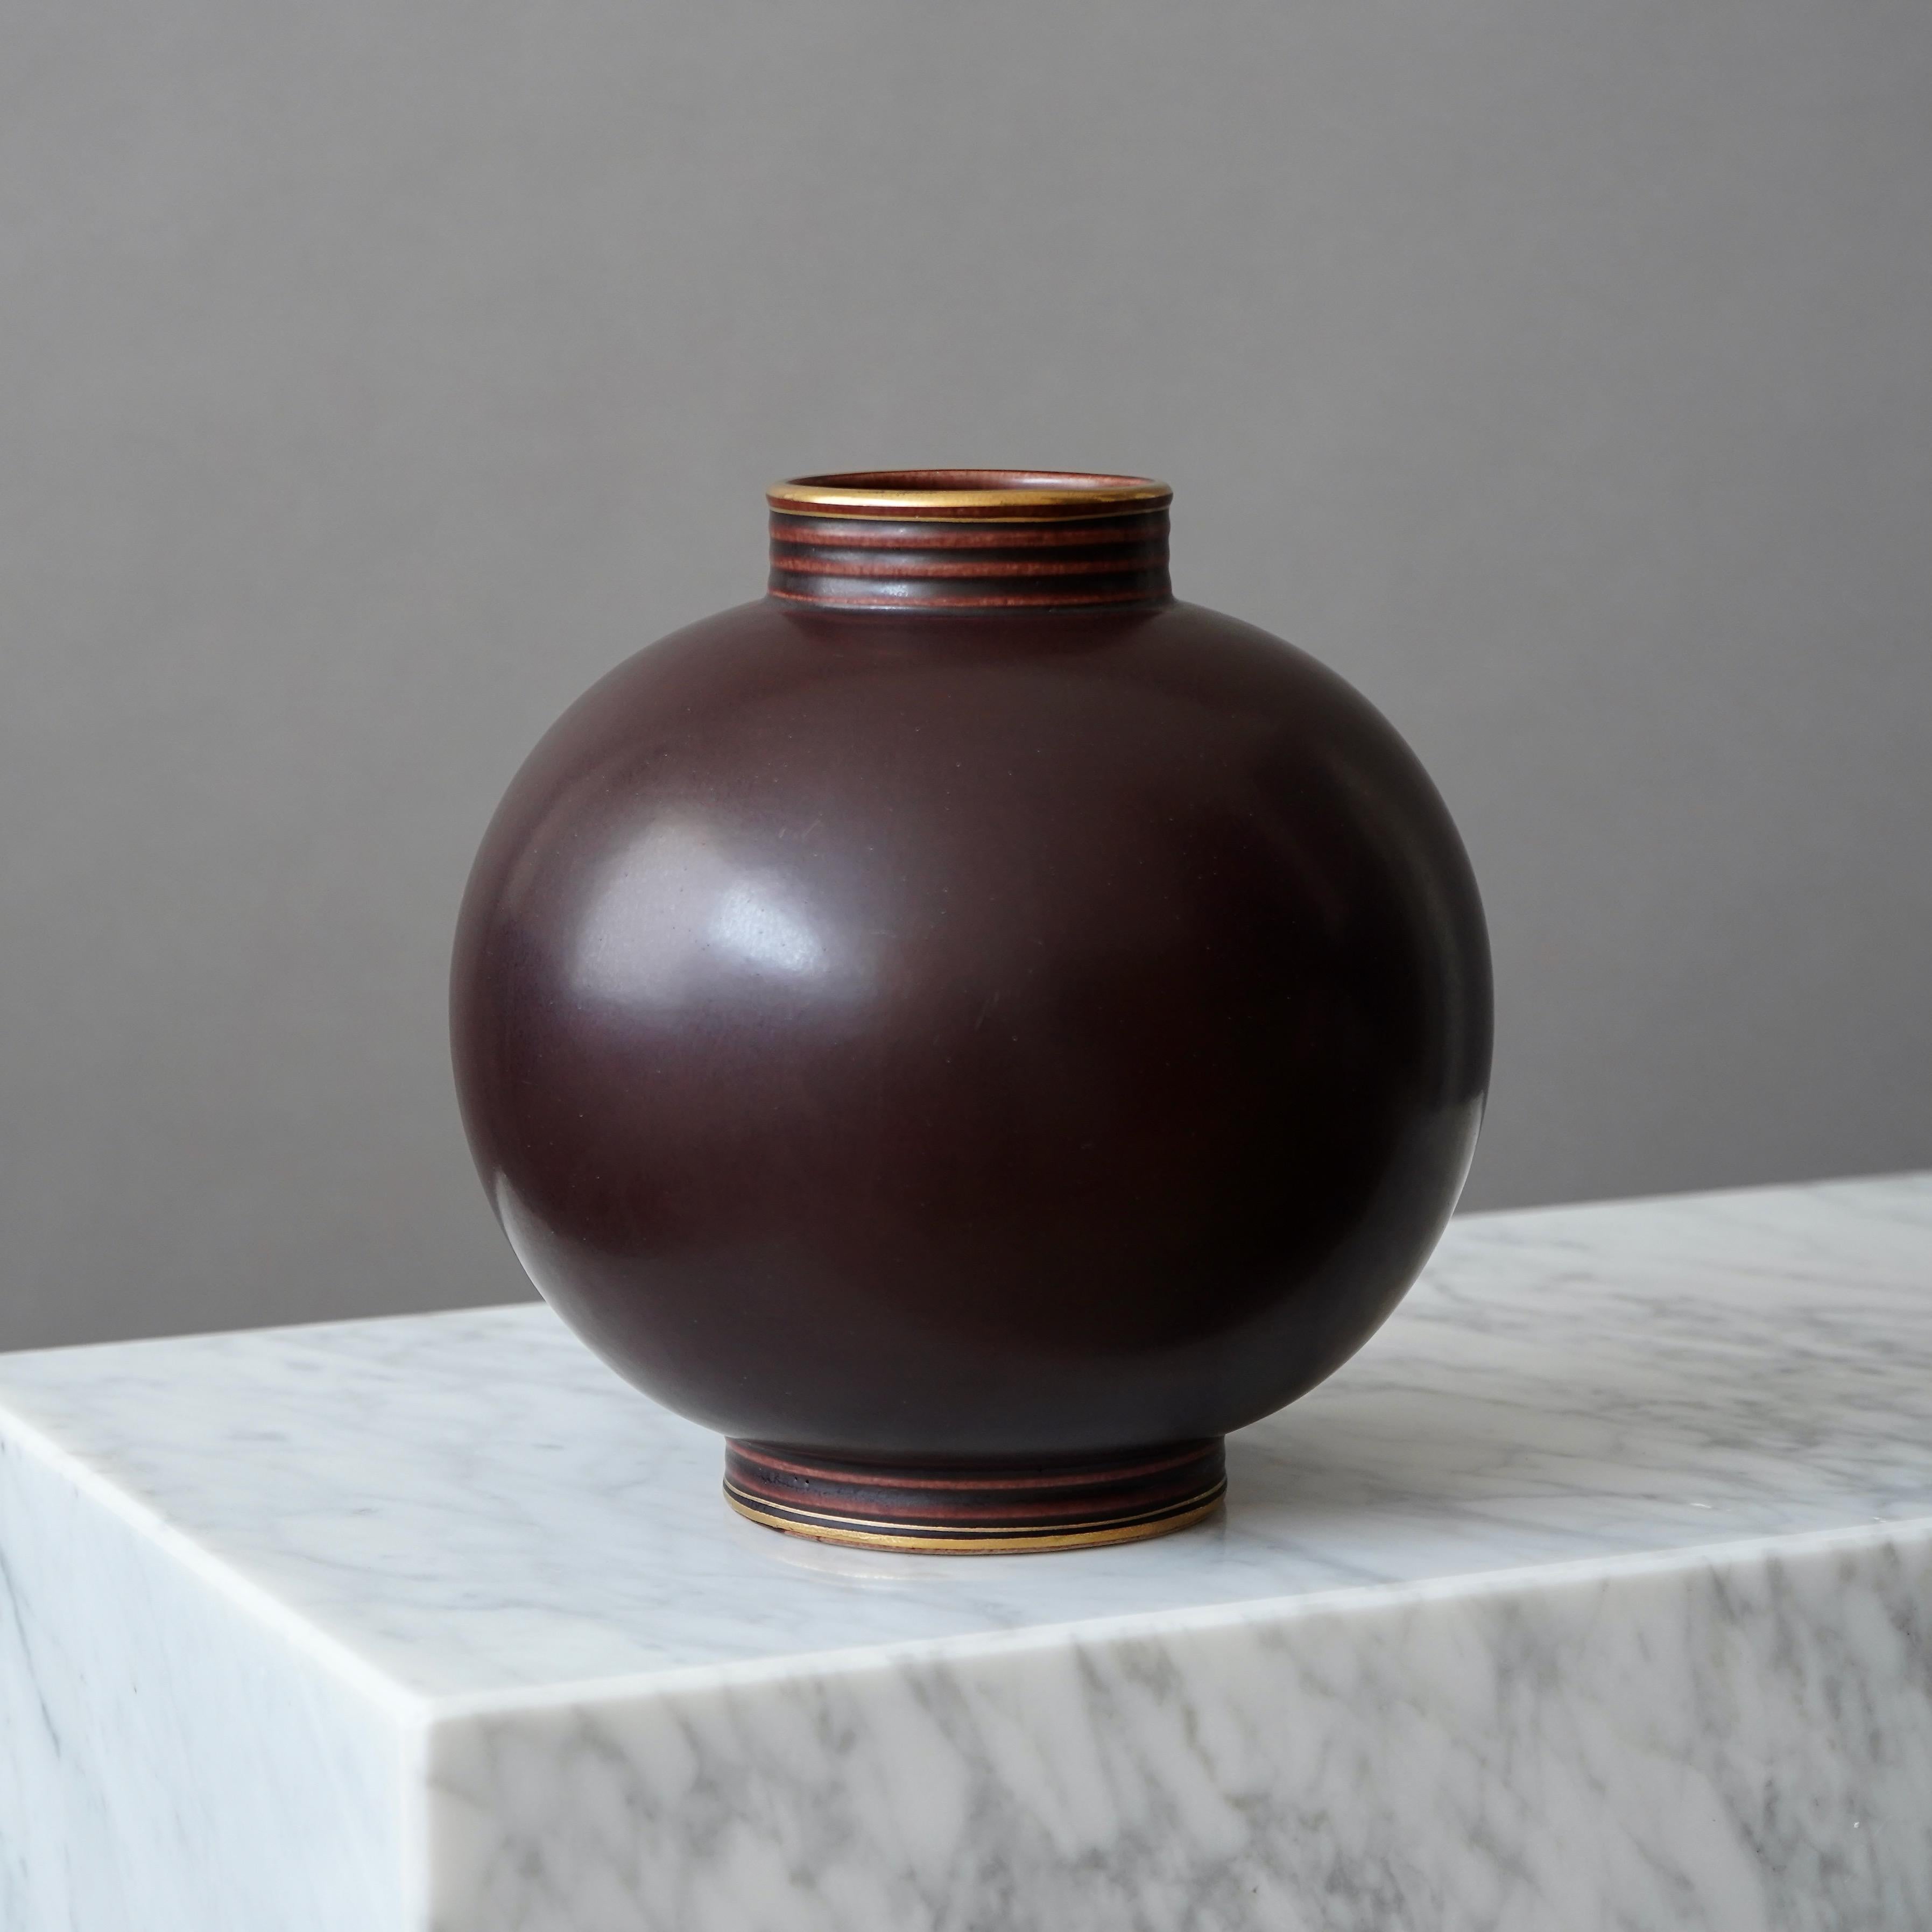 A beautiful stoneware vase with amazing glaze. 
Designed by Gunnar Nylund for Rorstrand, Sweden, 1930s.  

Great condition. Stamped 'Rörstrand' in gold.

Gunnar Nylund (1904-1997) was born in Paris, France. His parents were the well-known Finnish